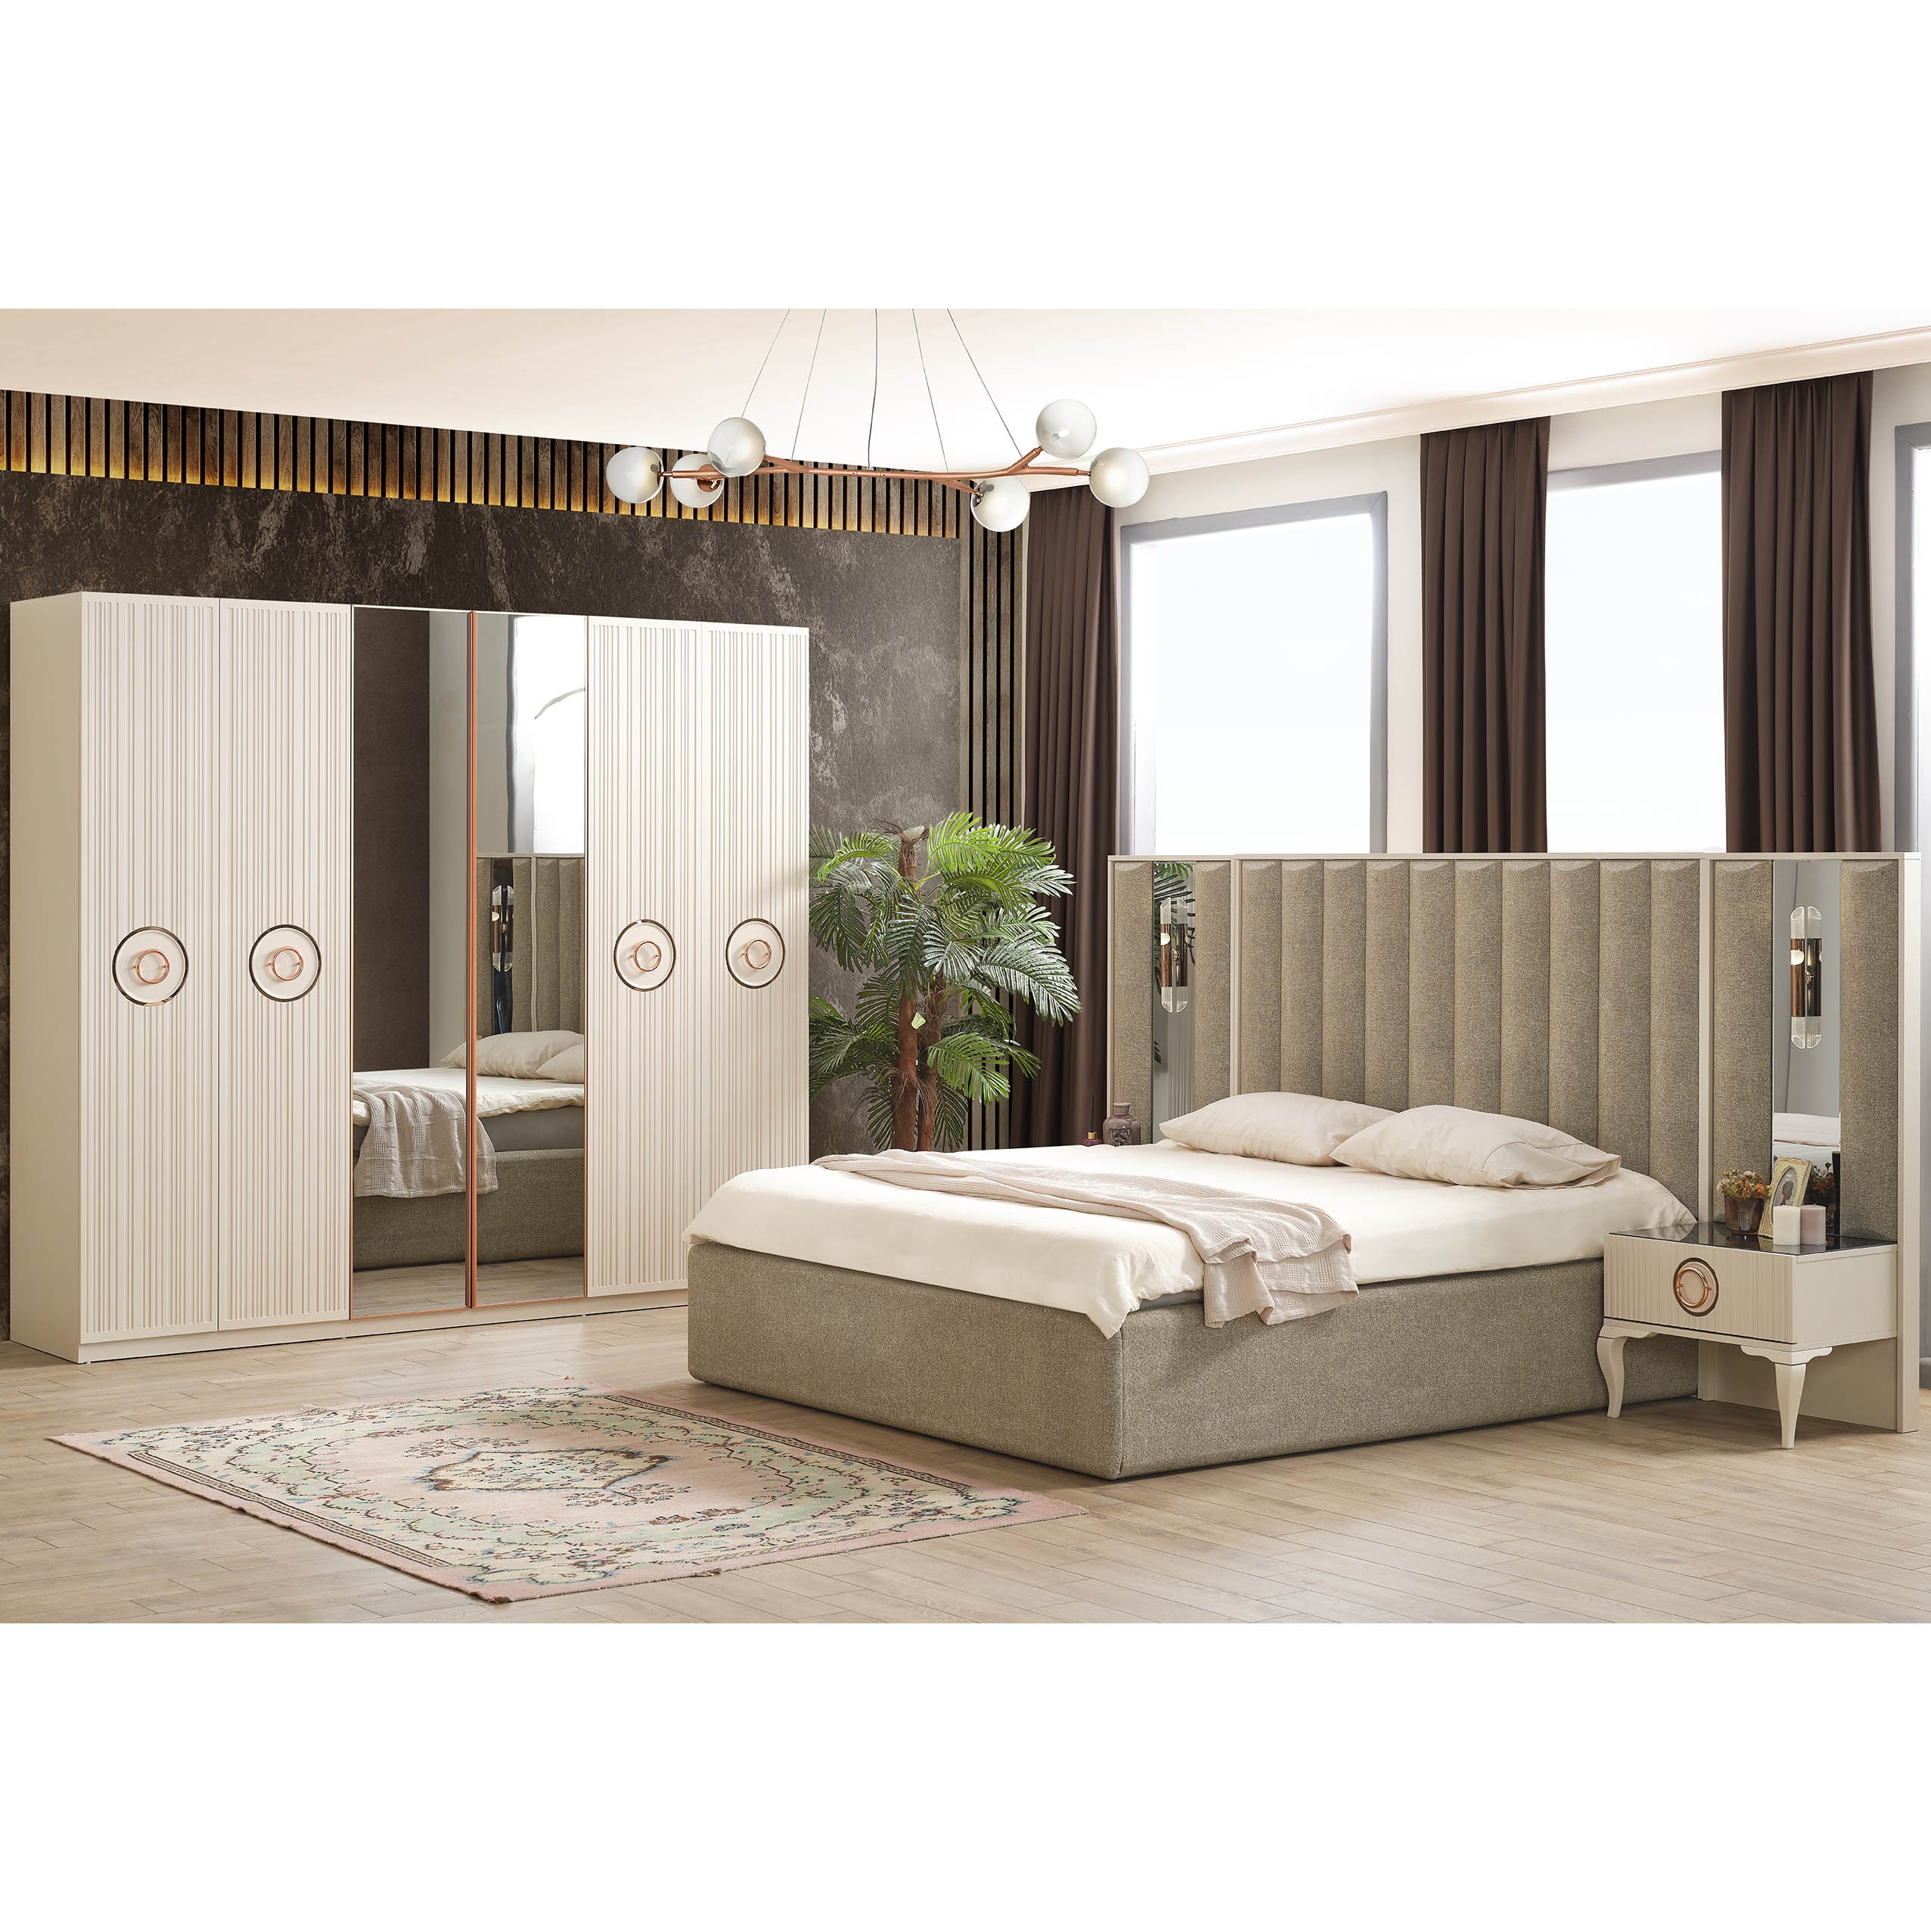 Style Larissa Vol1 Bed Without Storage 180x200 cm